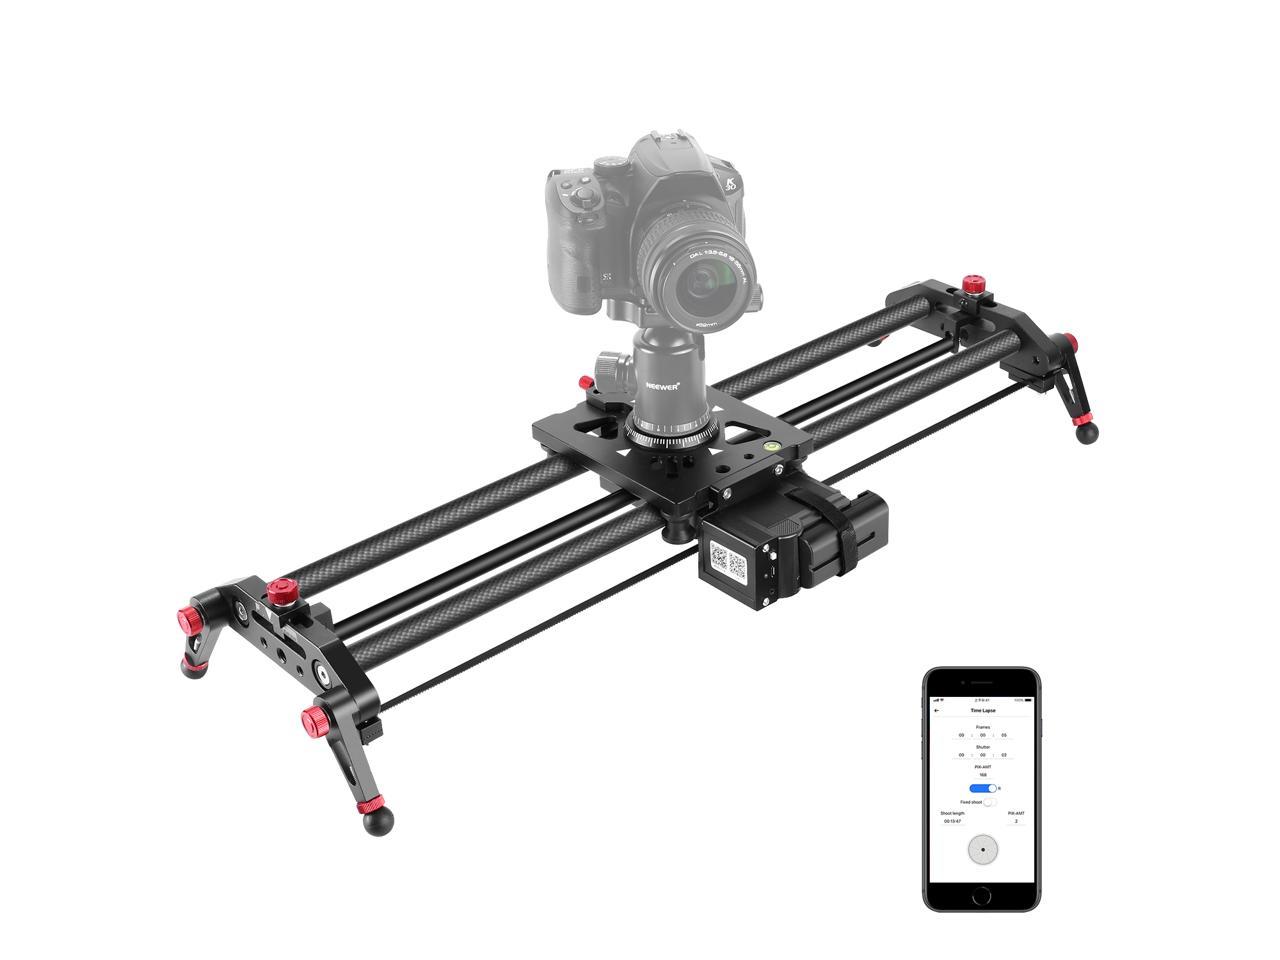 Neewer Motorized Camera Slider Support Video Mode Time-Lapse Photography 31.5”//80cm Carbon Fiber Dolly Rail Camera Slider with Remote Controller Horizontal,Tracking and 120° Panoramic Shooting